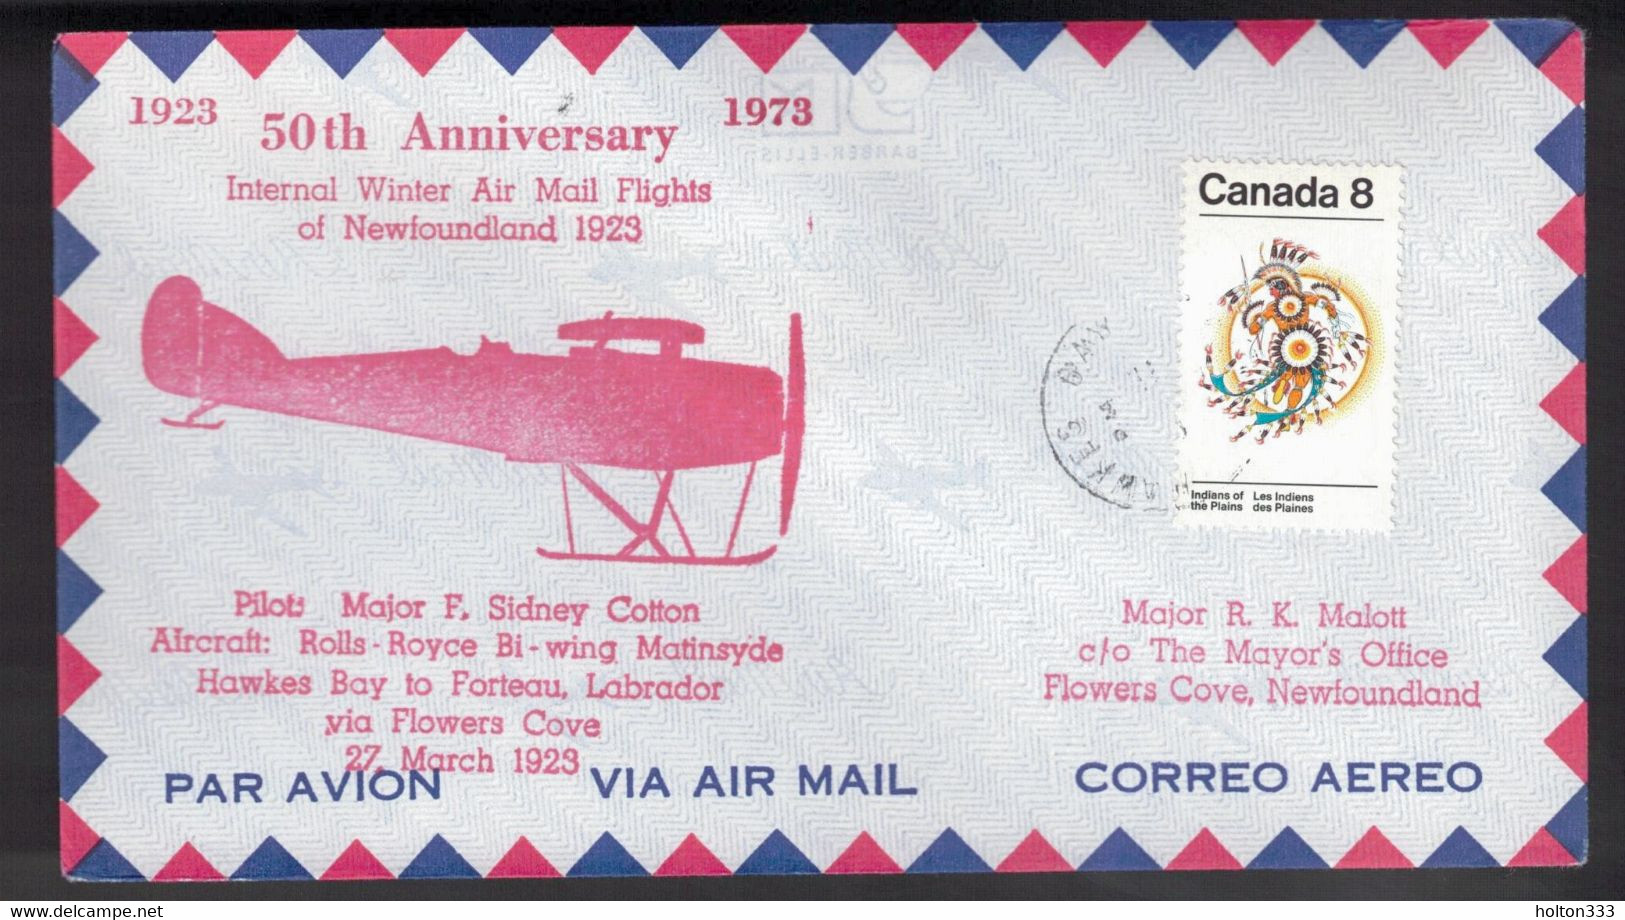 CANADA 50th Anniversary -  Newfoundland Flight From Hawkes Bay To Flowers Cove - Enveloppes Commémoratives